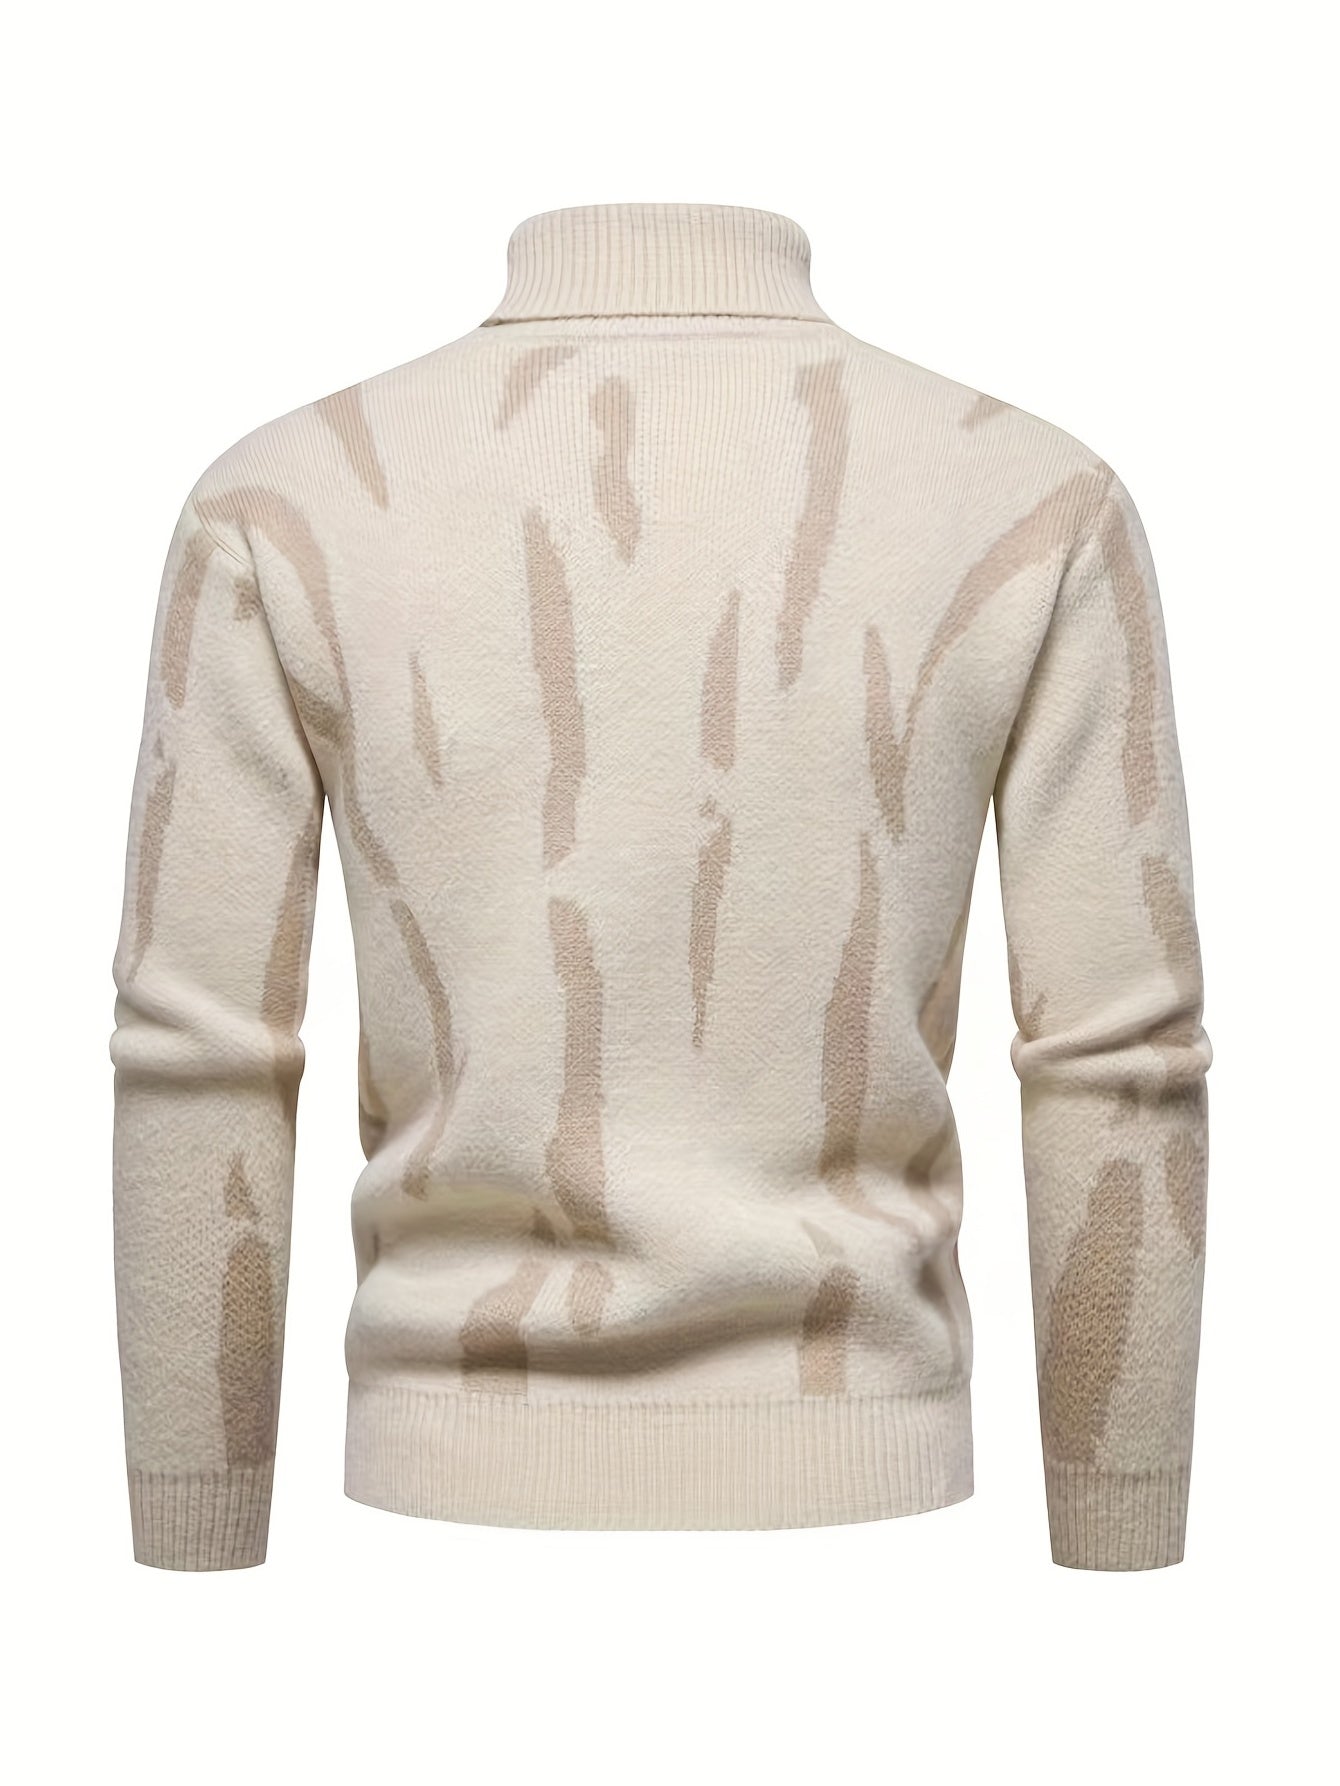 Trendy Men's Stretch Thermal Turtleneck Sweater - Stay Warm And Stylish All Winter